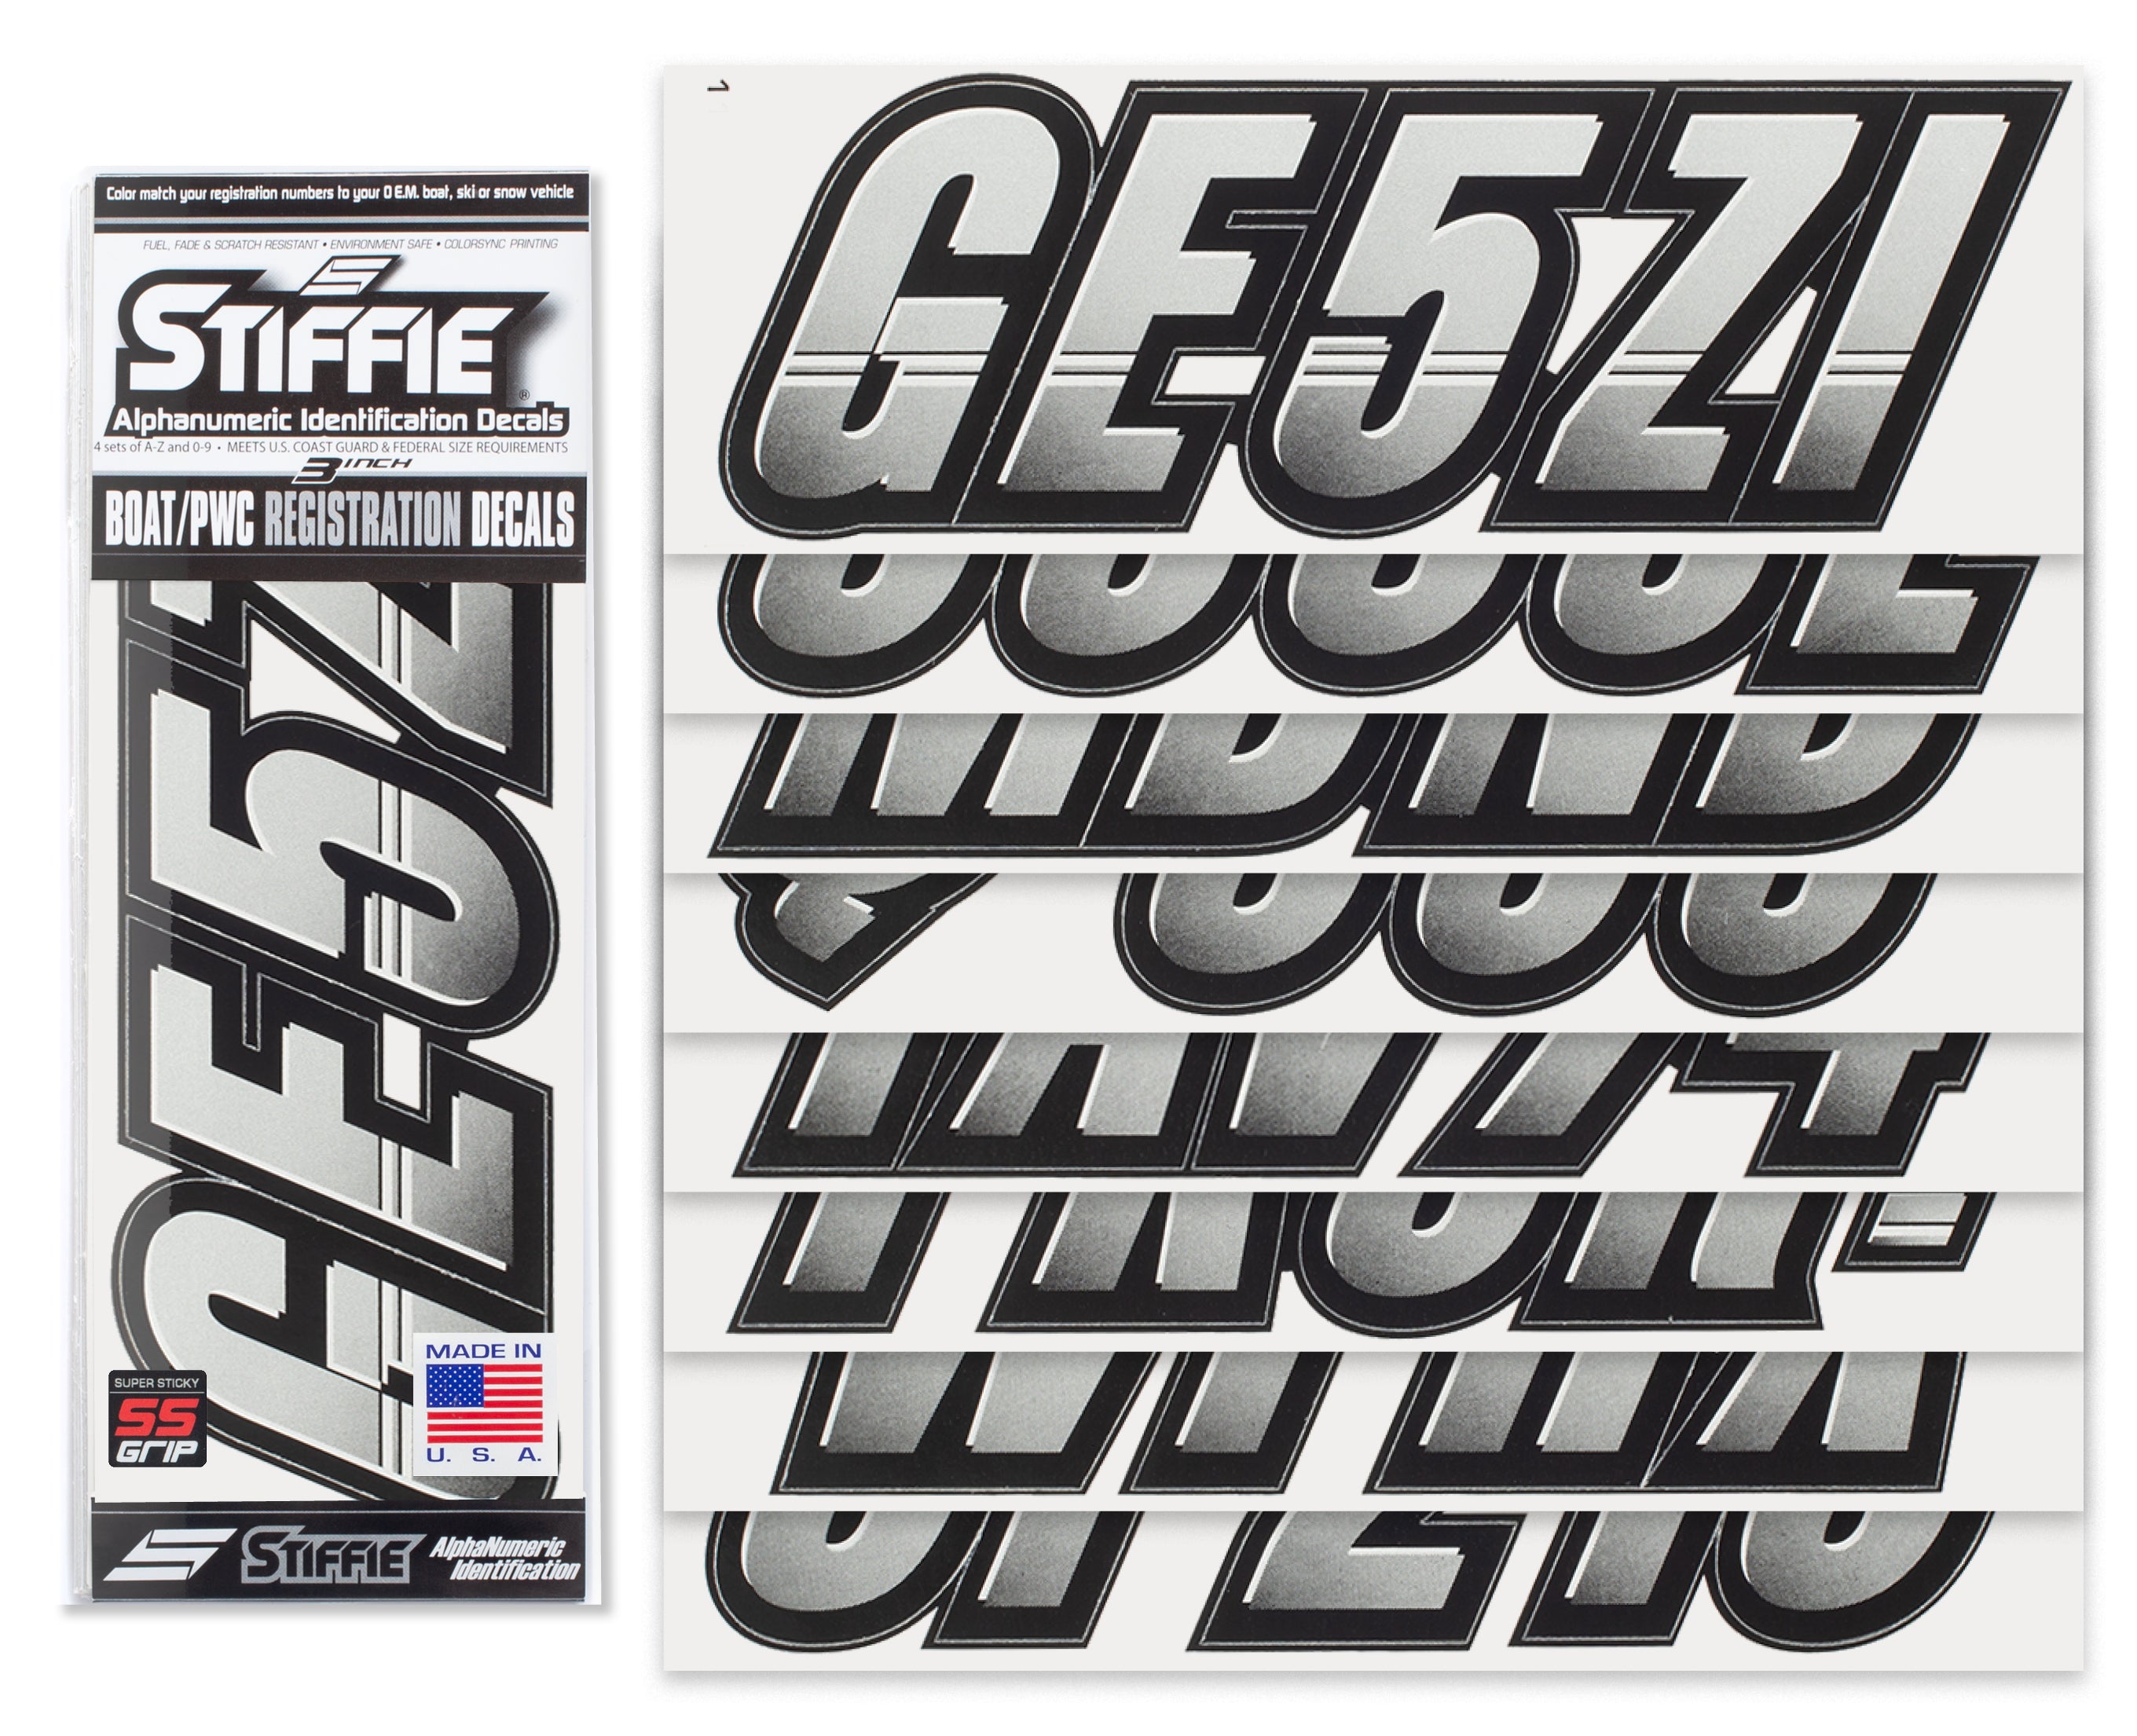 Techtron Silver/Black Super Sticky 3" Alpha Numeric Registration Identification Numbers Stickers Decals for Sea-Doo Spark, Inflatable Boats, Ribs, Hypalon/PVC, PWC and Boats.